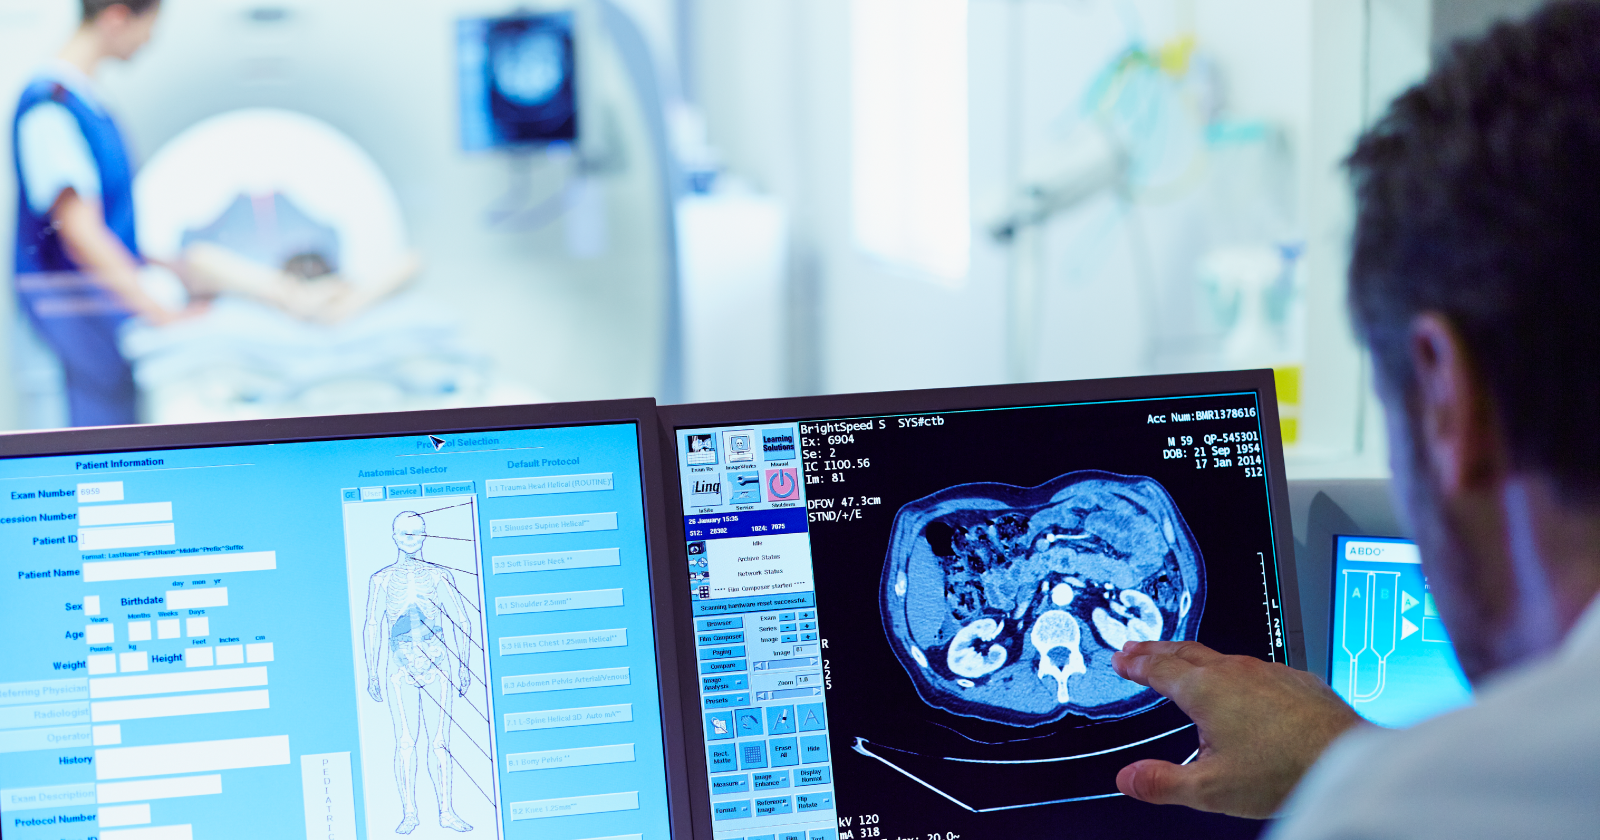 One of the most significant trends in medical imaging is the integration of artificial intelligence. AI algorithms are now capable of interpreting medical images with incredible accuracy, often surpassing human capabilities. This means faster and more precise diagnoses, which can be critical in conditions like cancer and cardiovascular diseases.